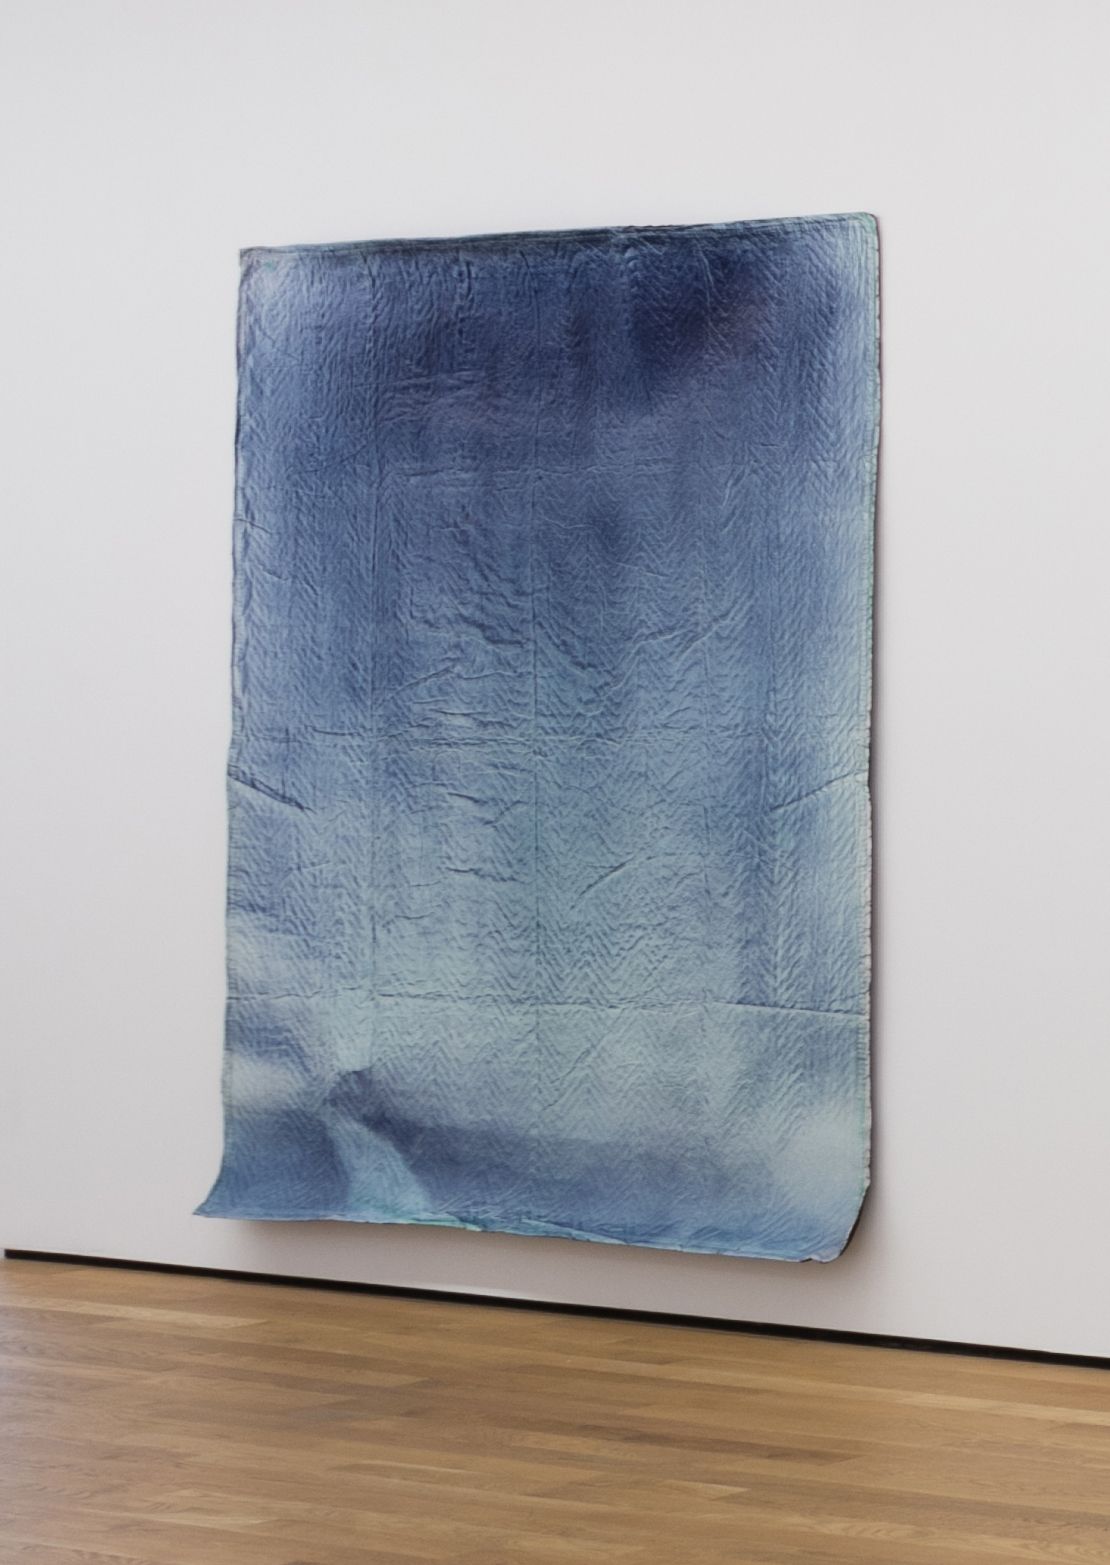 Jeremy Everett, Padded Painting, 2018, paint on blanket, 80 x 72 in. (203 x 183 cm.,) Edouard Malingue Gallery, Hong Kong, Shanghai